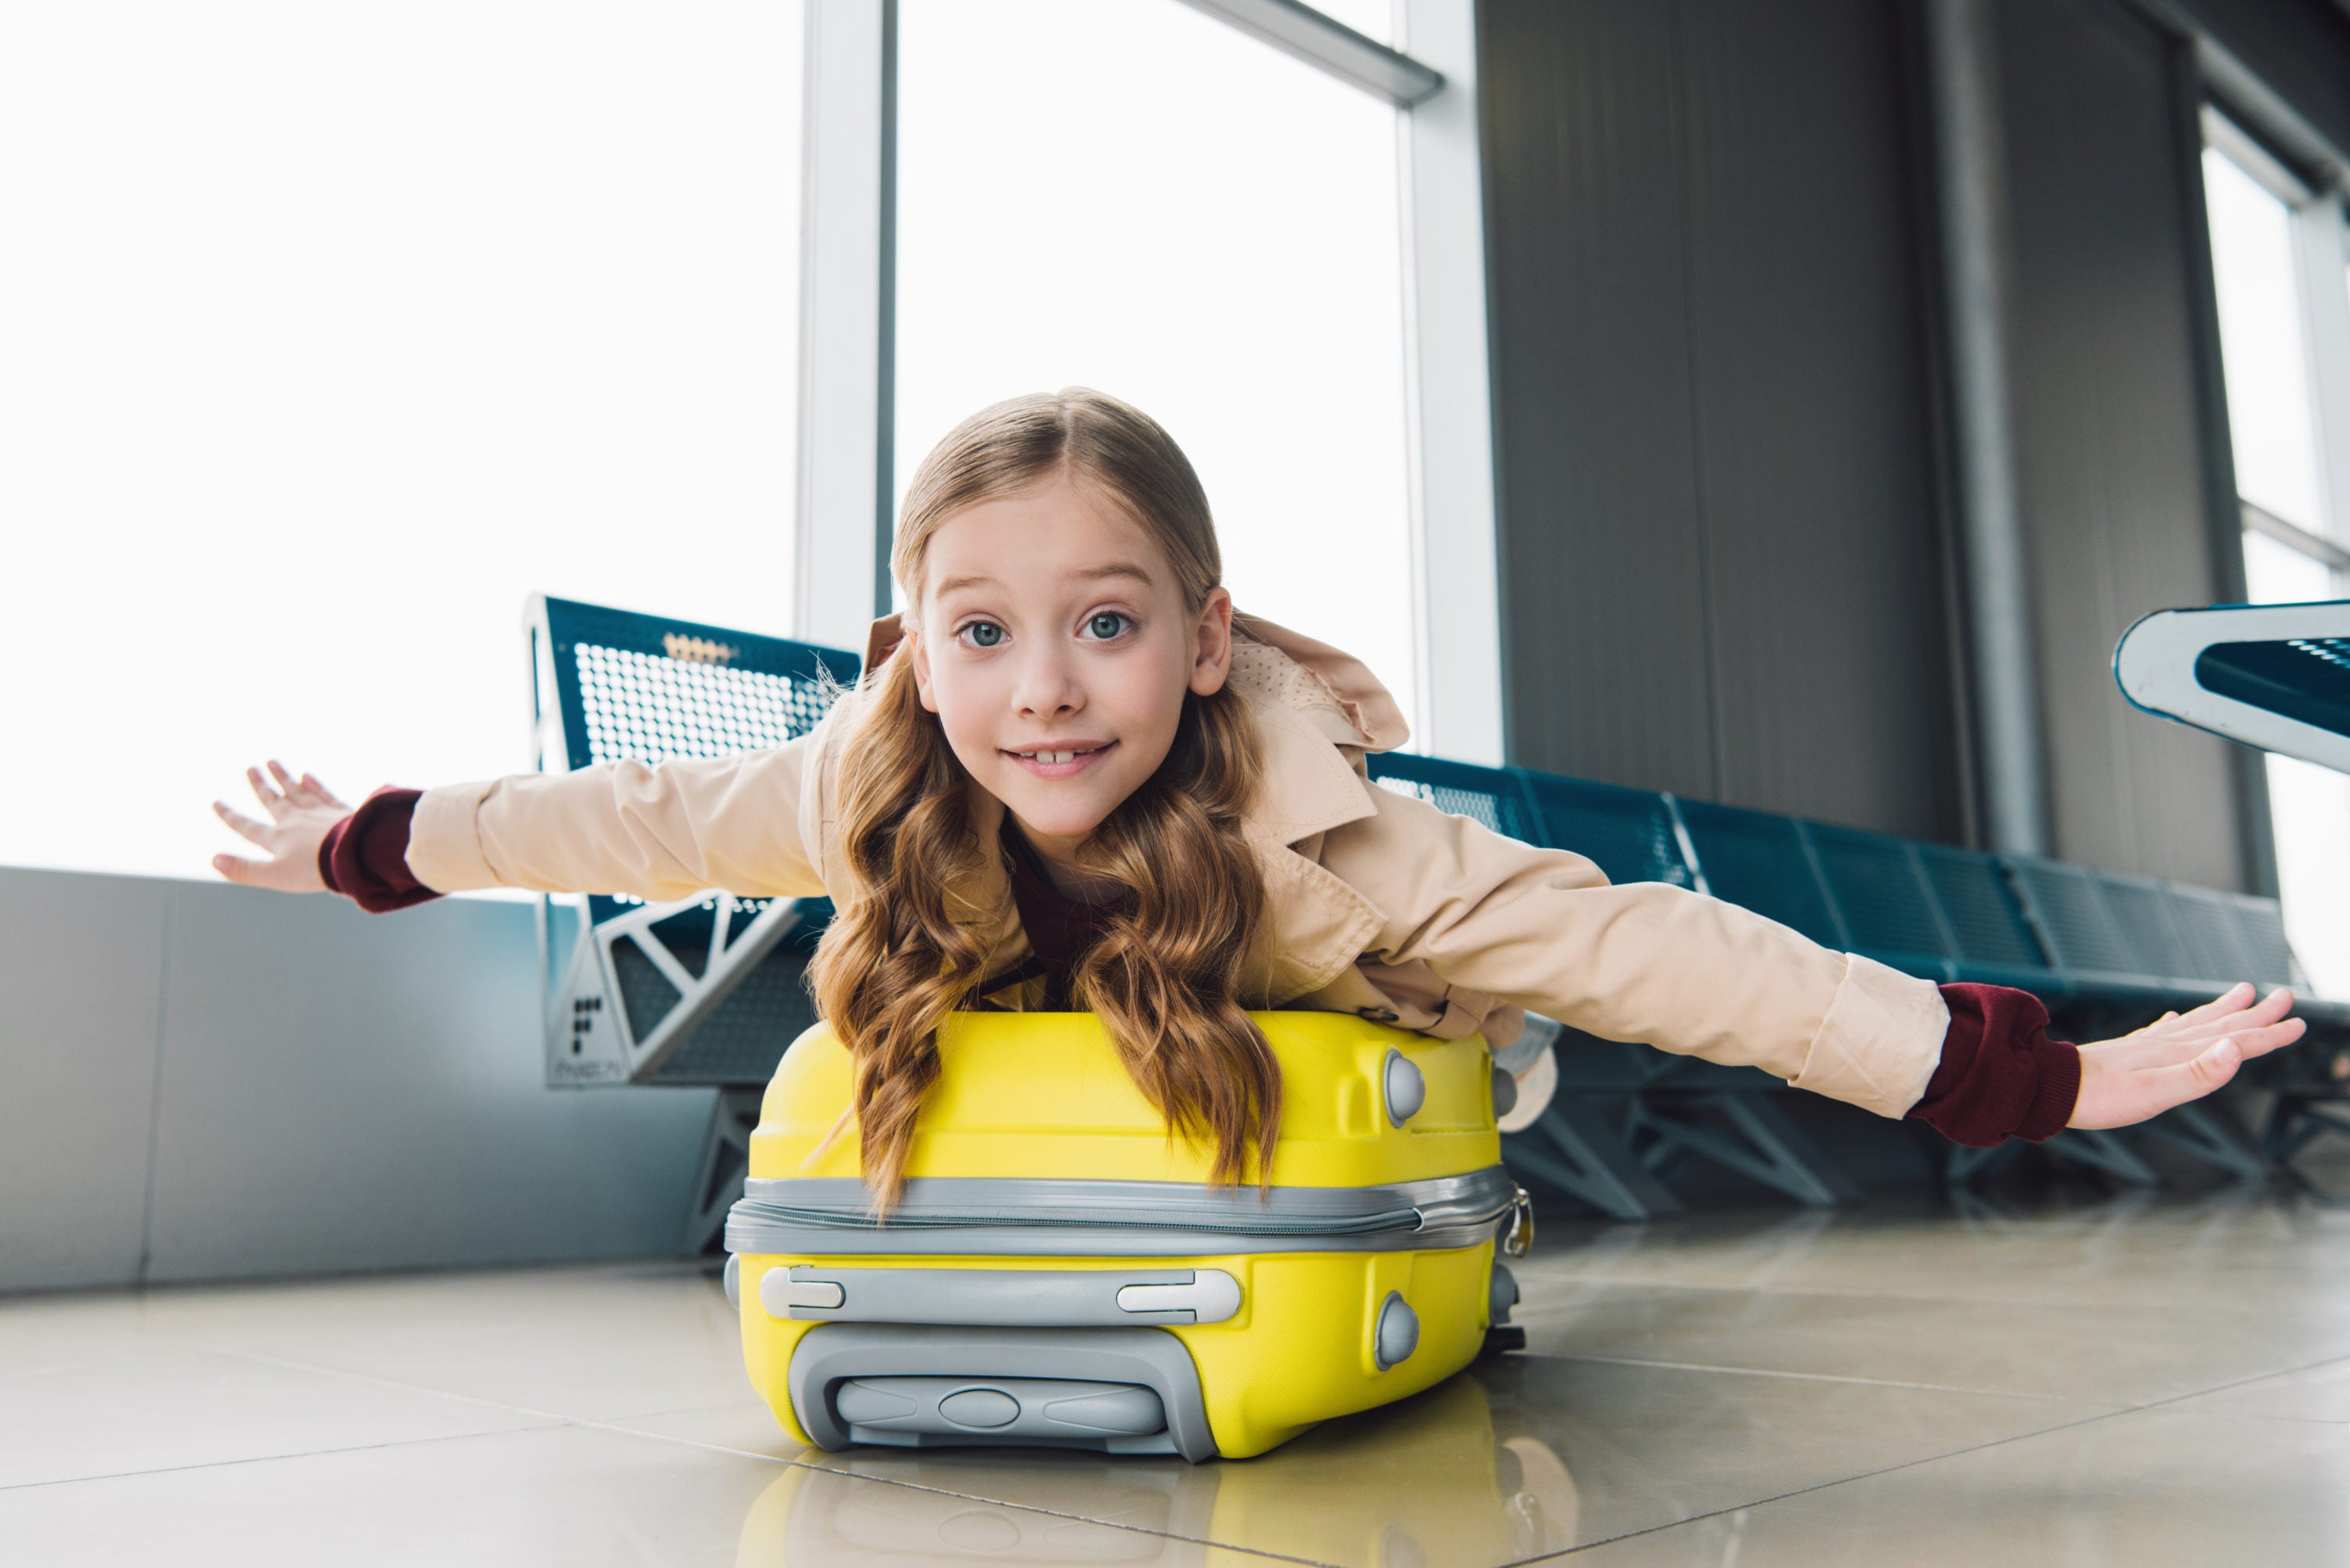 Girl on luggage at airport